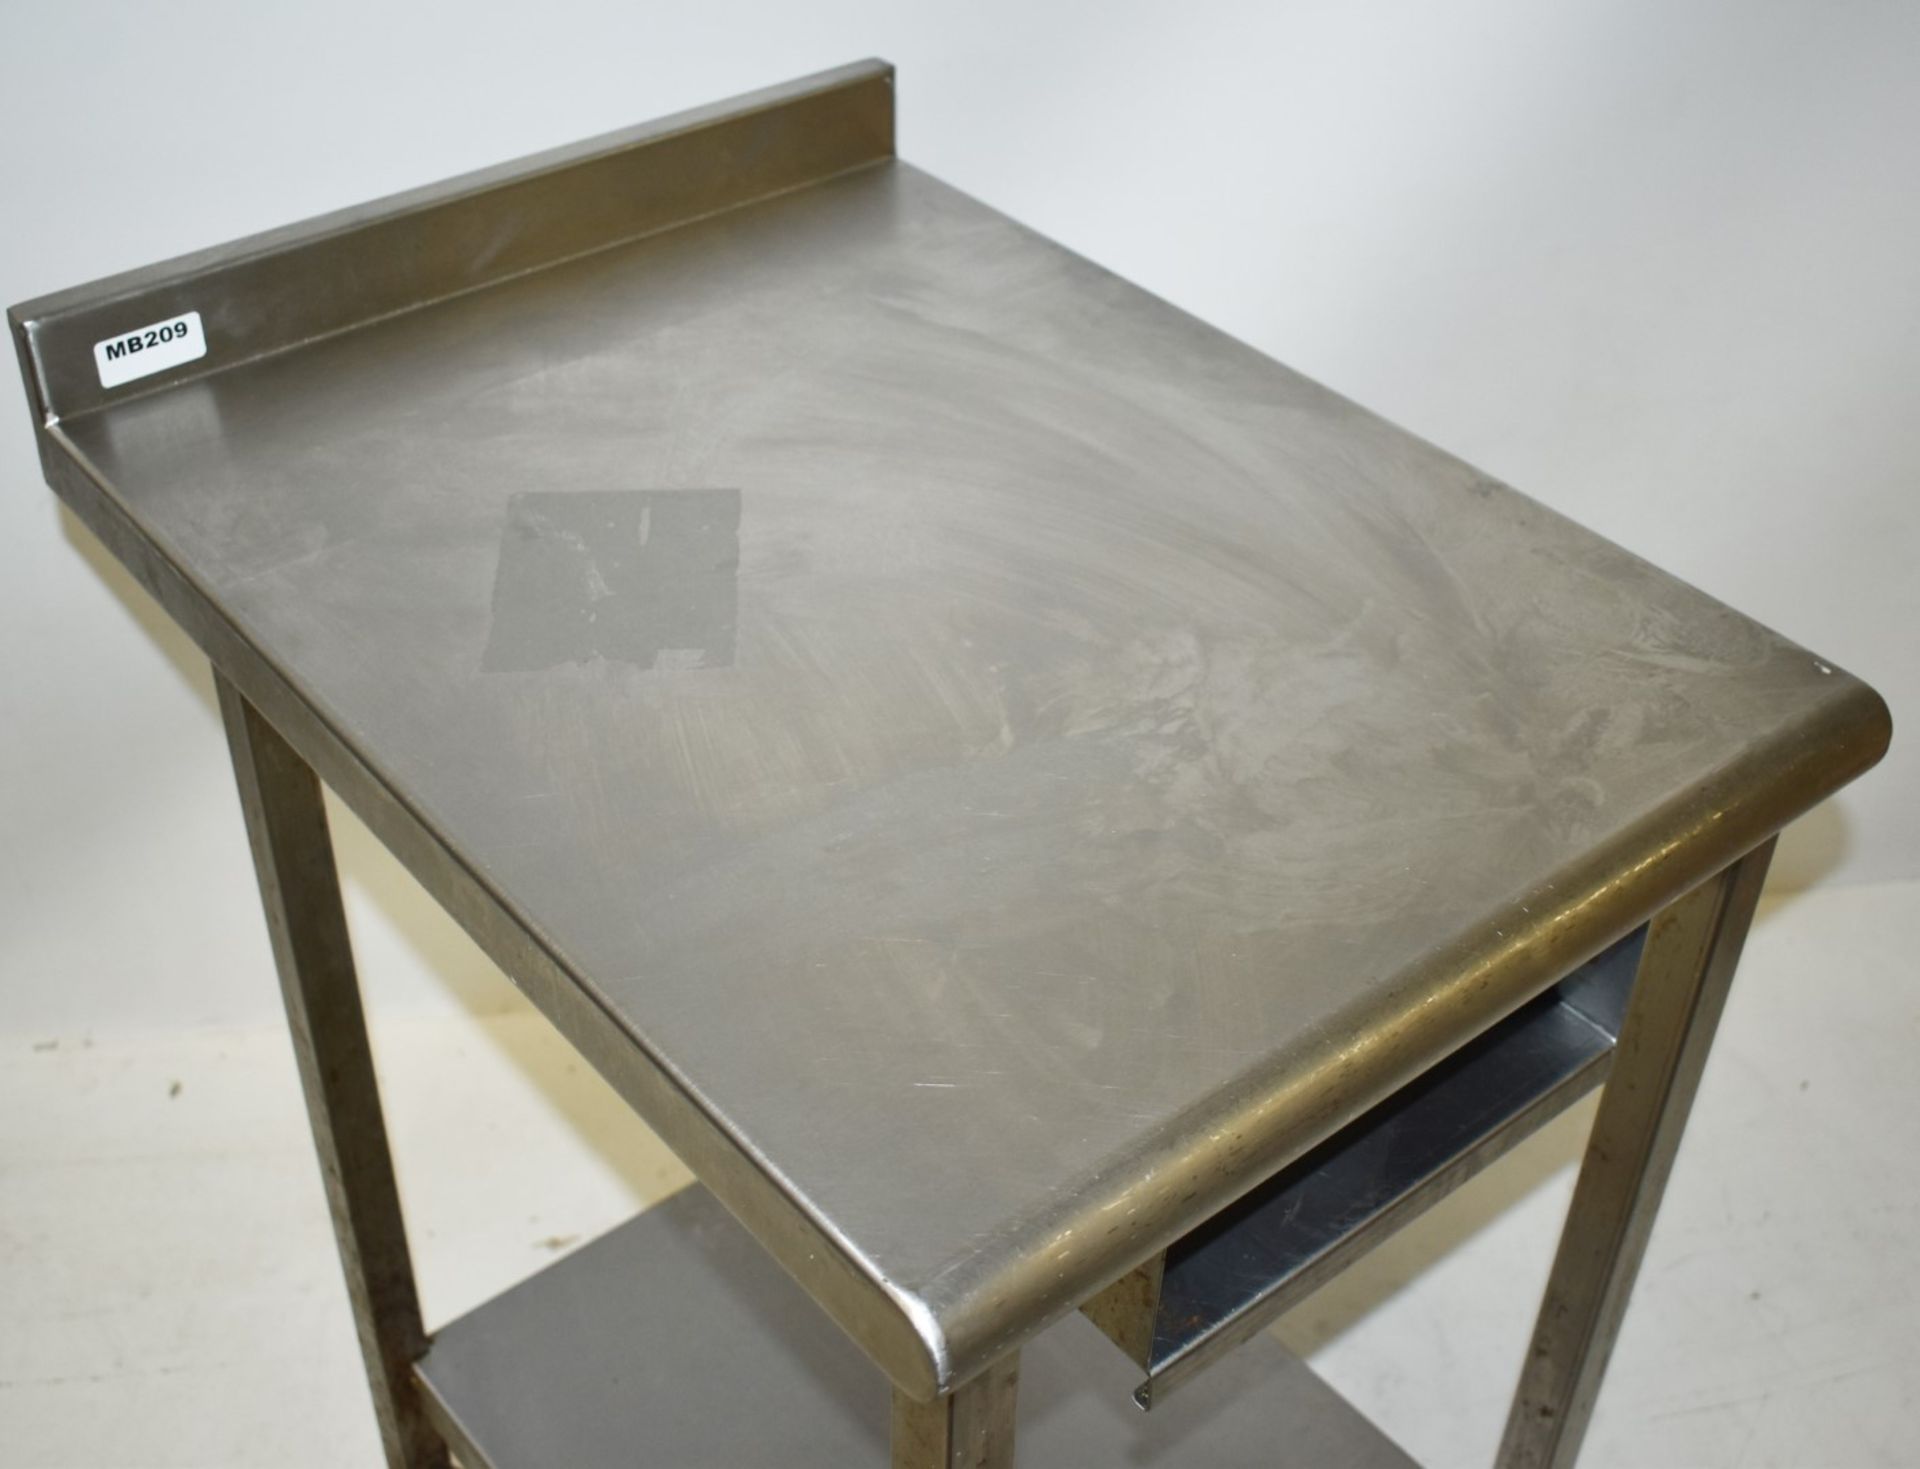 1 x Stainless Steel Prep Bench With Upstand, Undershelf and Castors - H82 x W48 x D66 cms - - Image 2 of 2